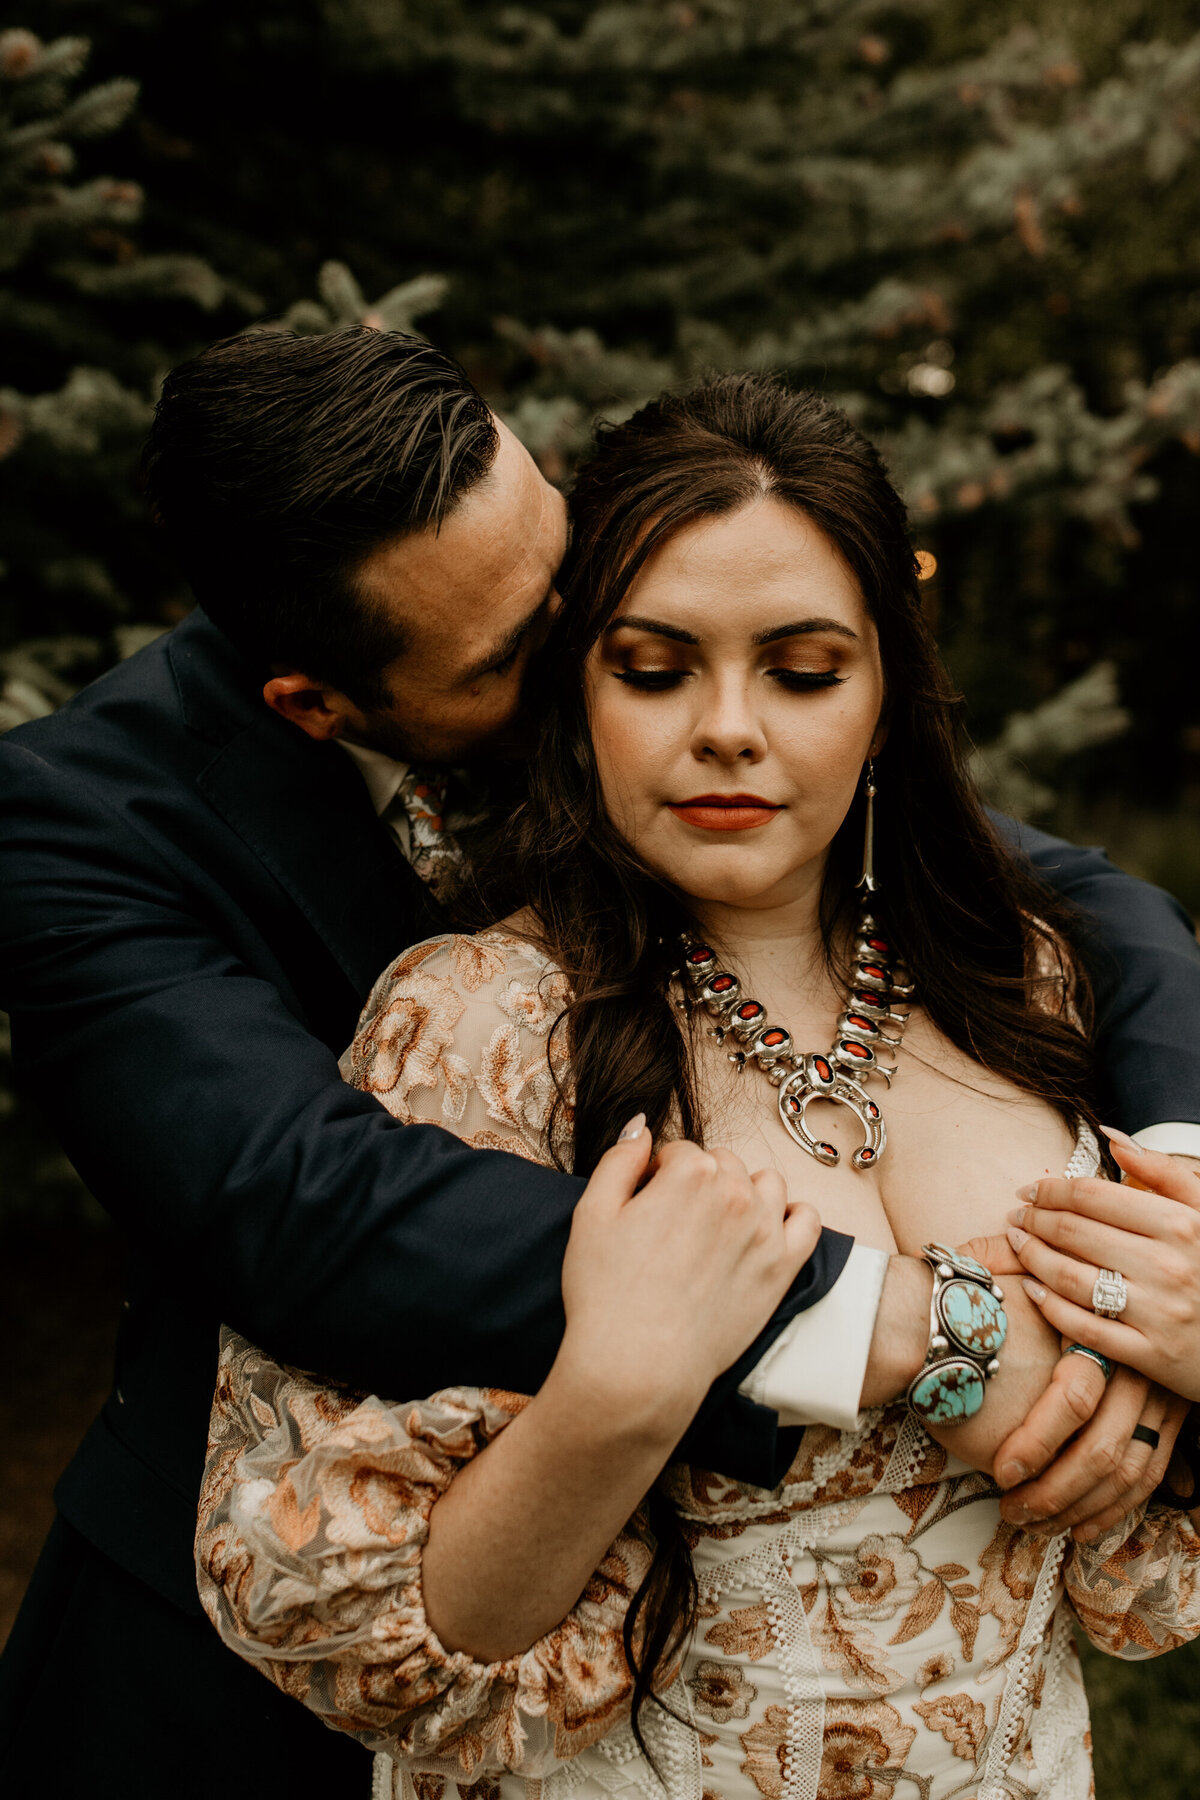 taos-new-mexico-intimate-wedding-photography-38